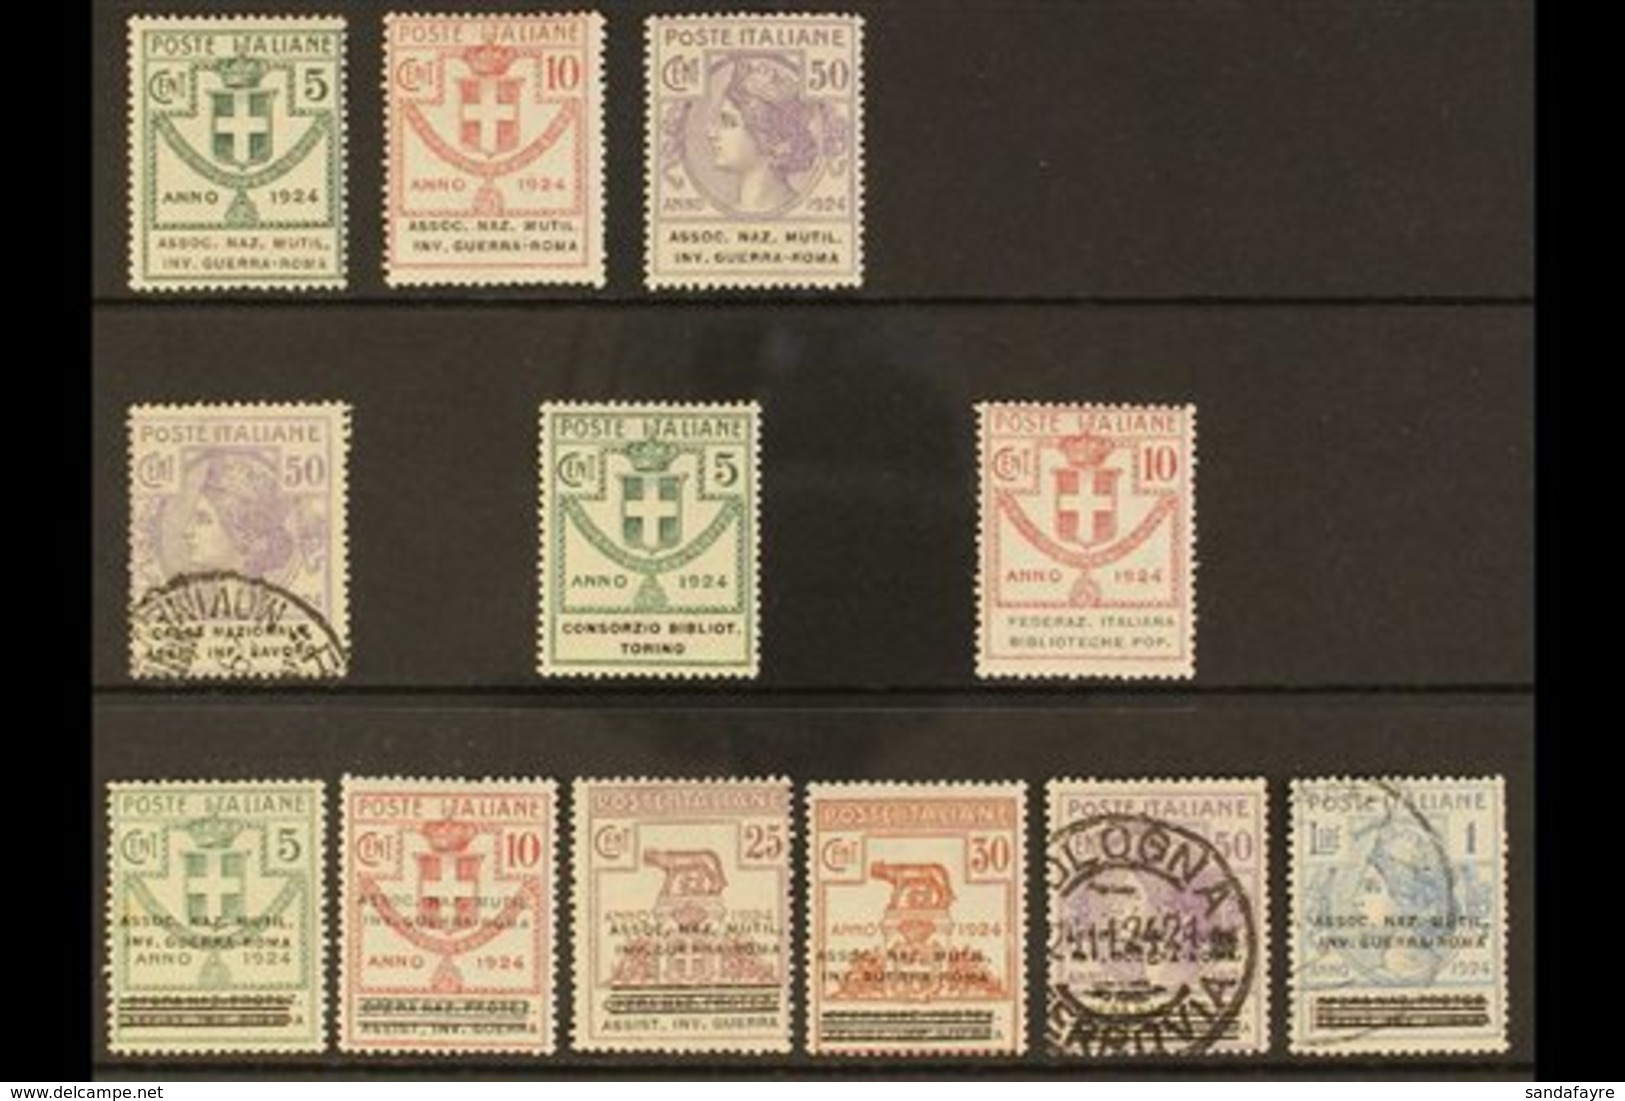 FRANCHISE STAMPS 1924 Mint & Used All Different Group On A Stock Card, Includes Assoc. Naz. Mutil. Inv. Guerra - Roma, C - Ohne Zuordnung